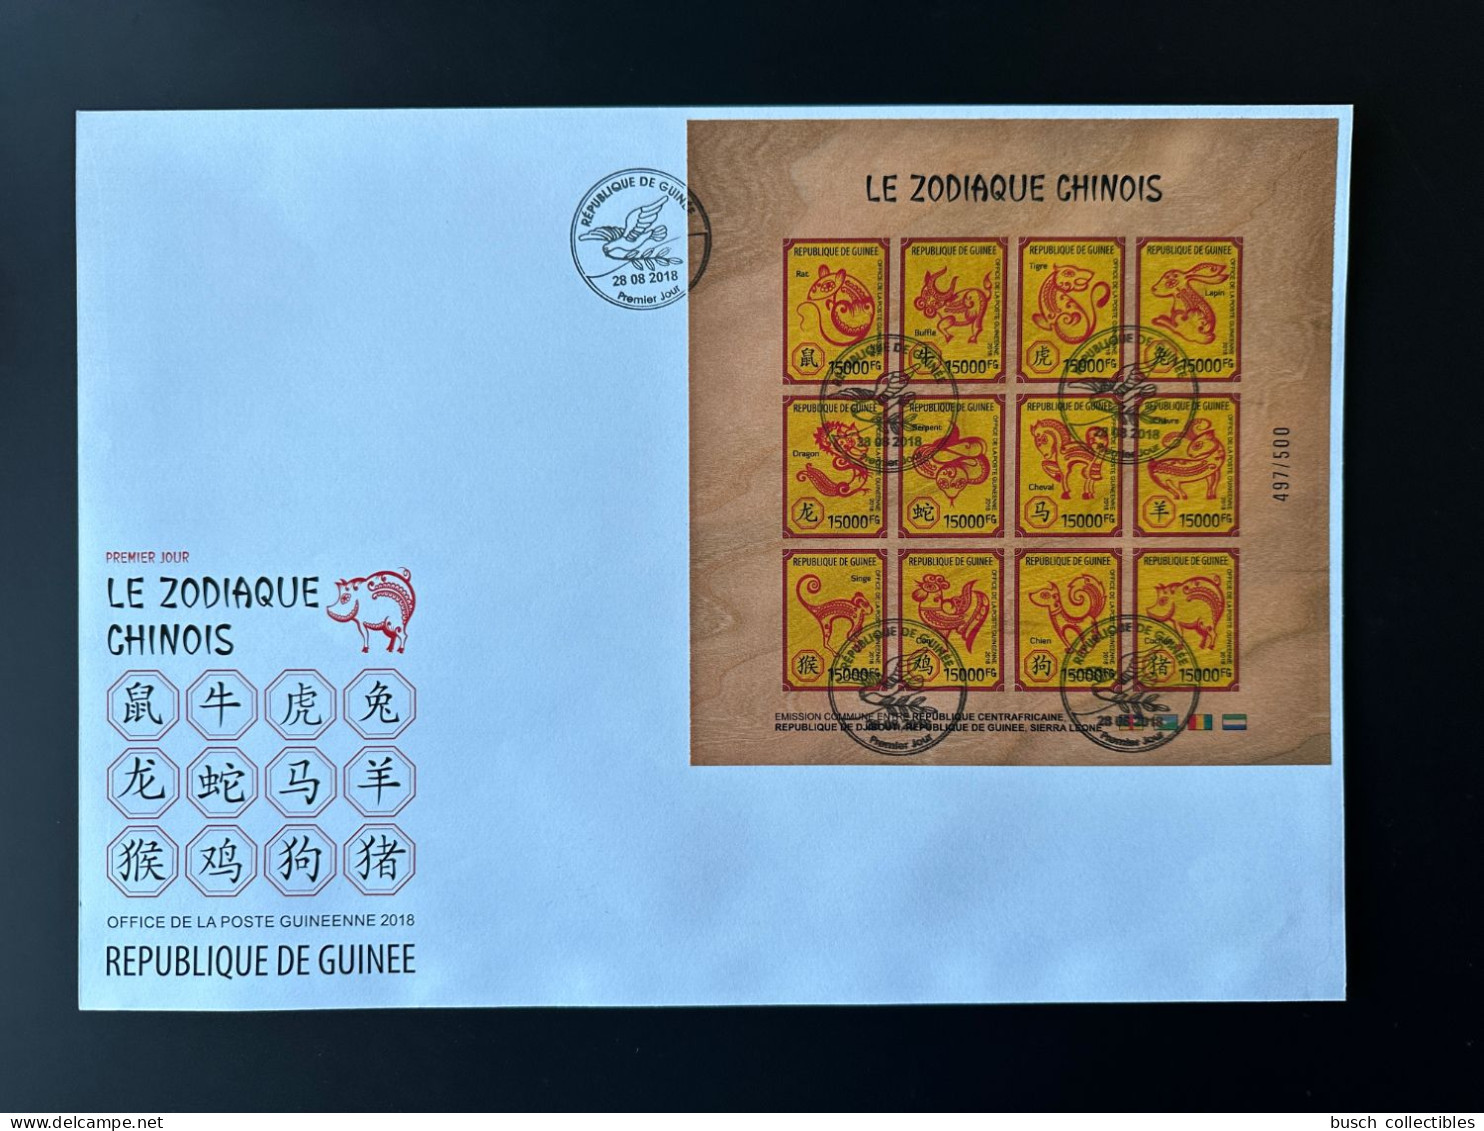 IMPERF NON DENTELE Guinée Guinea 2018 FDC Wooden Holzfurnier Bois Chinese Zodiac Zodiaque Chinois Joint Issue - Emissions Communes